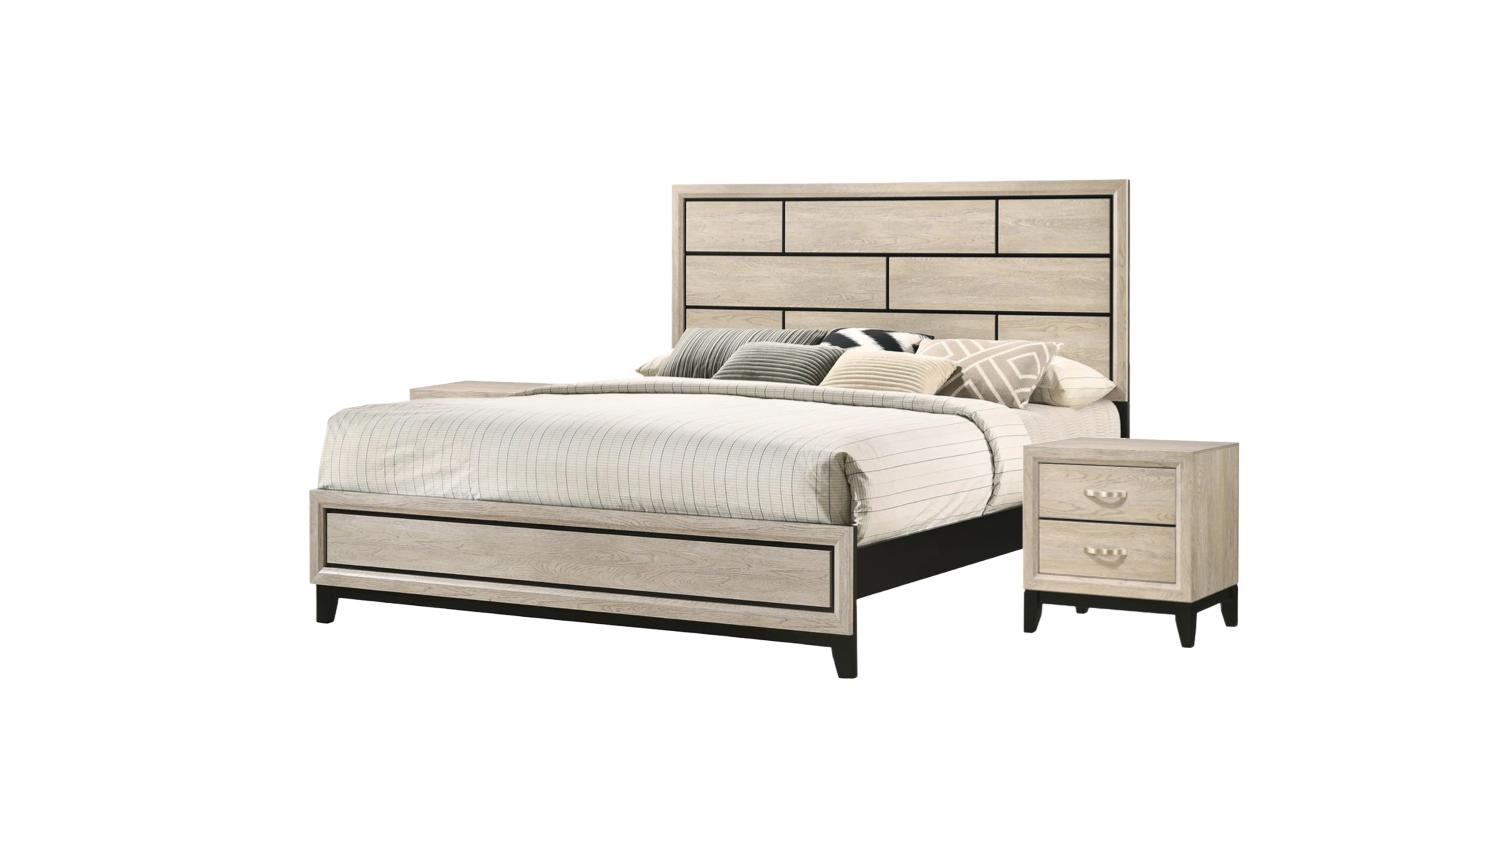 Contemporary, Simple Panel Bedroom Set Akerson B4630-K-Bed-3pcs in Beige 